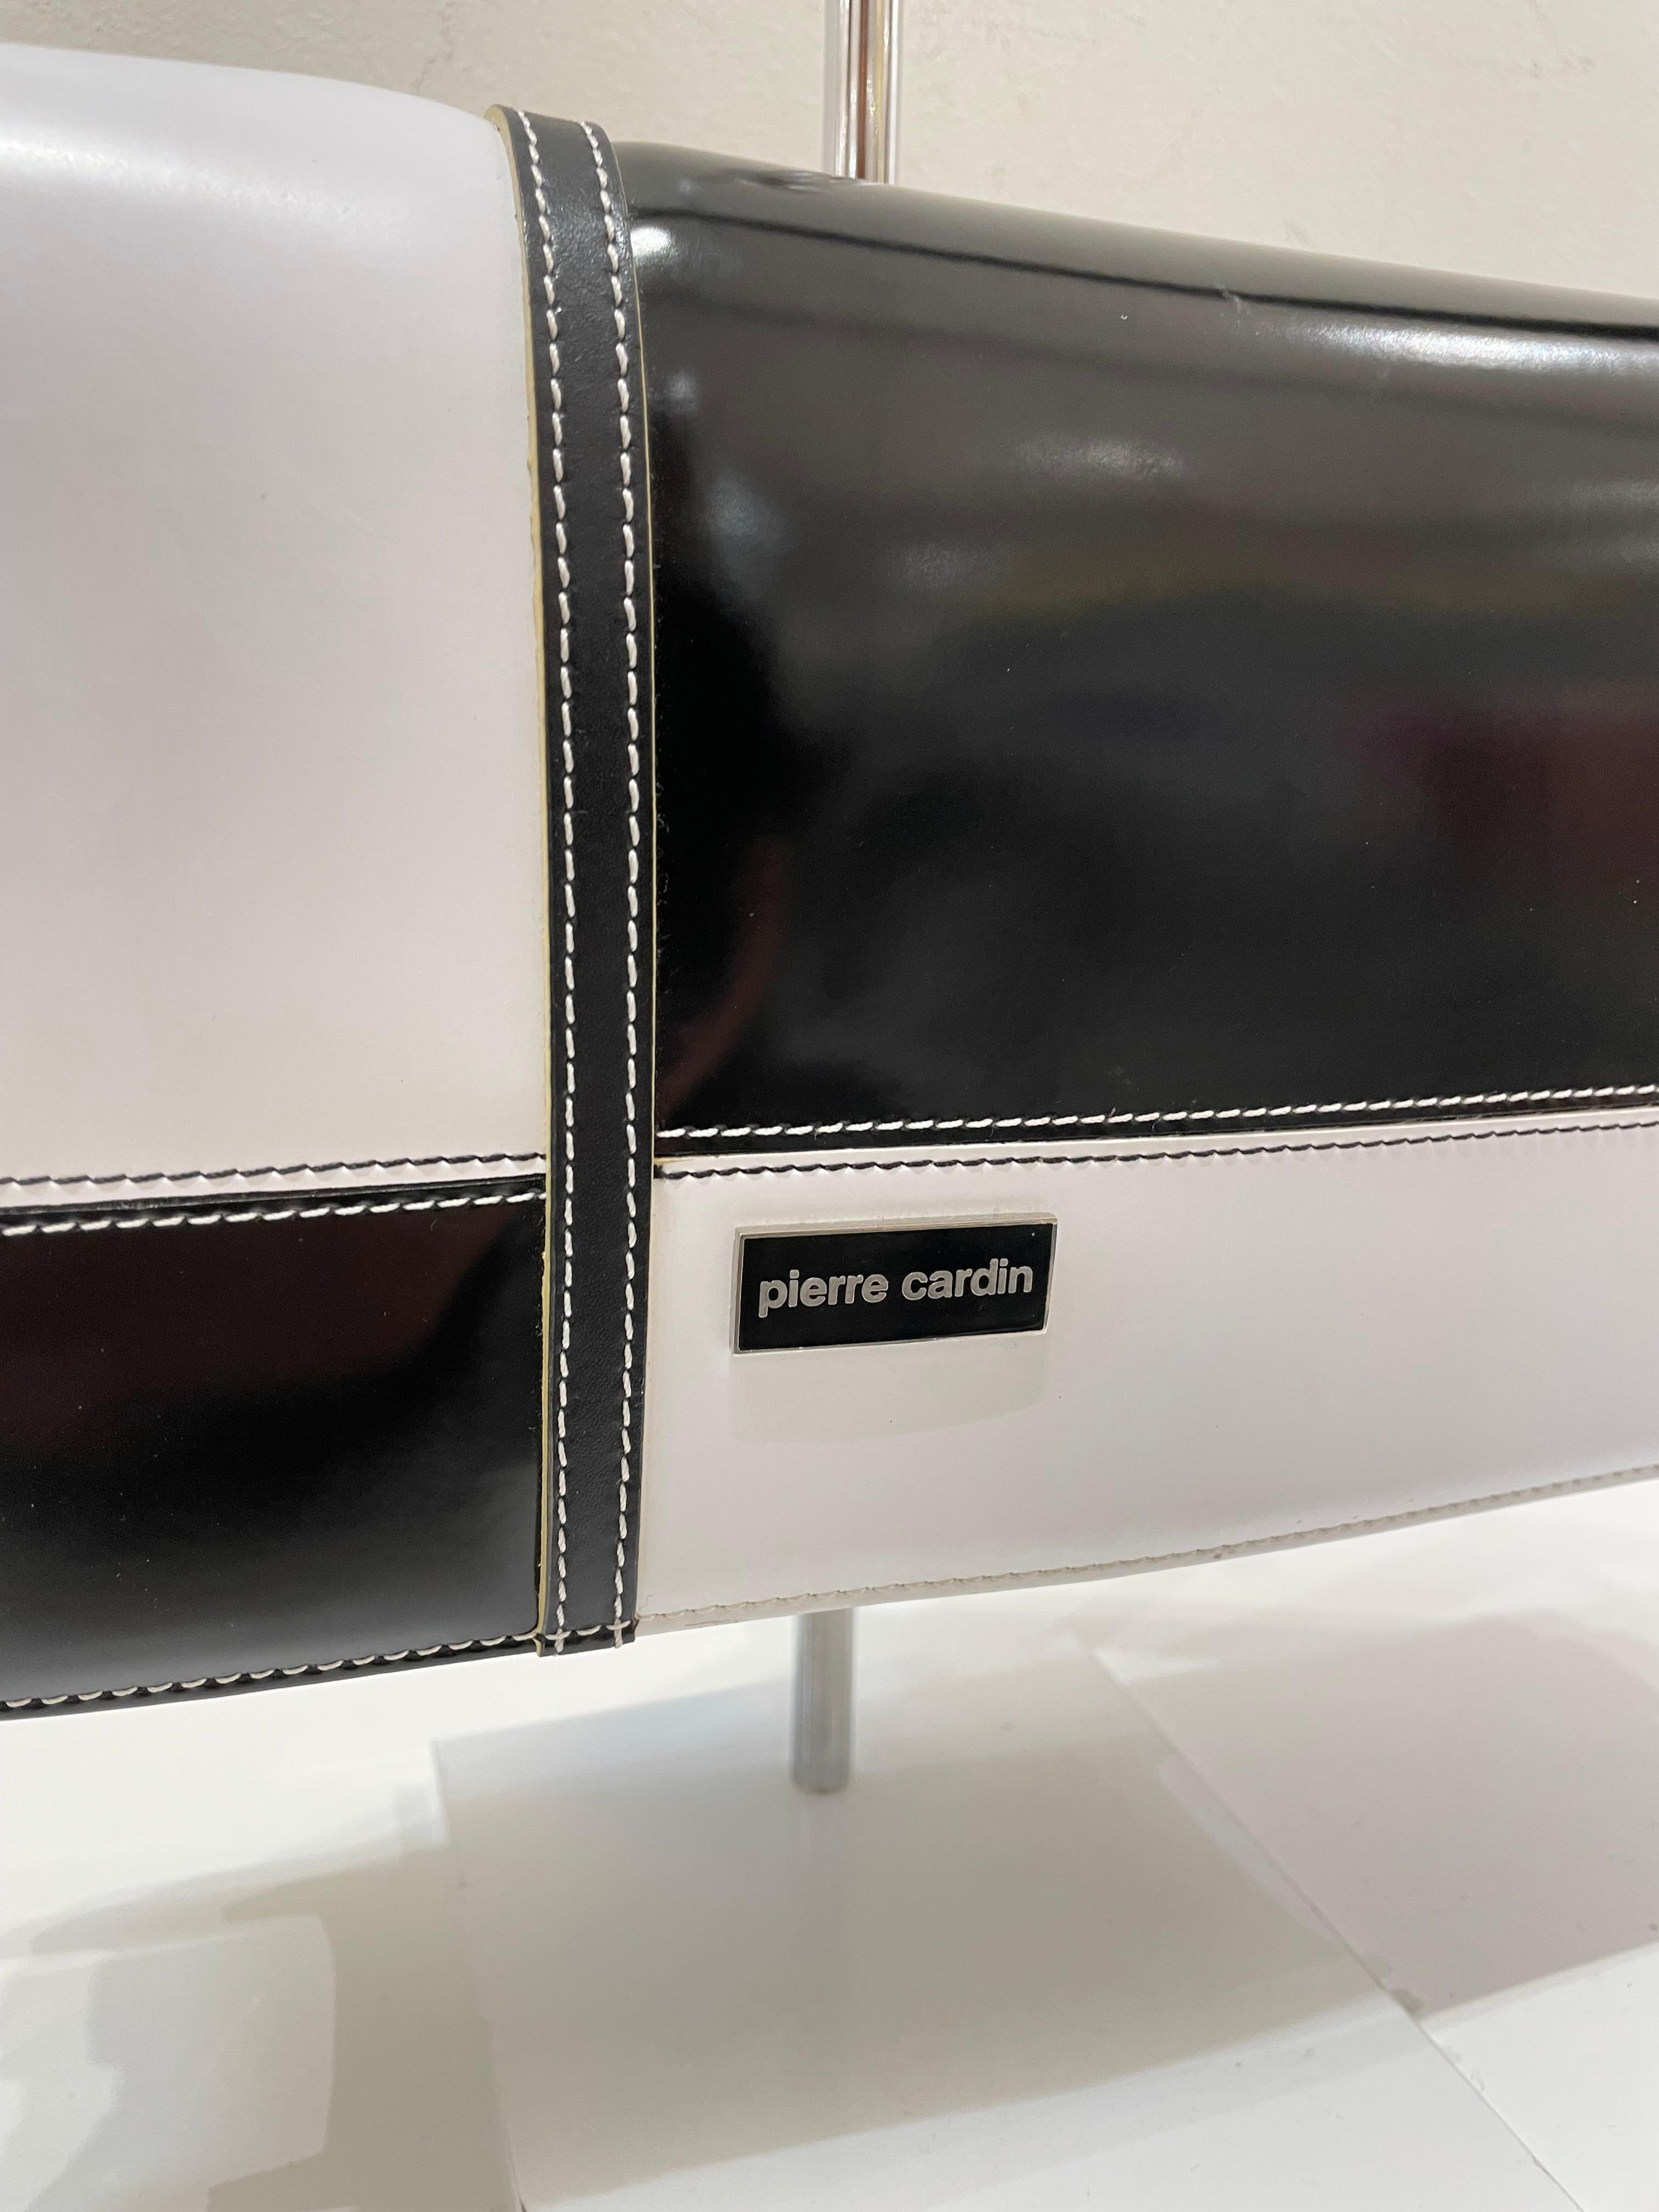 Vintage Pierre Cardin bag white and black in very 70s paint. In perfect condition it has only a small scratch on the side as you can see from the photo. Magnetized button closure.
26 cm wide, 15 cm high, 6 cm deep and 20 cm handle.